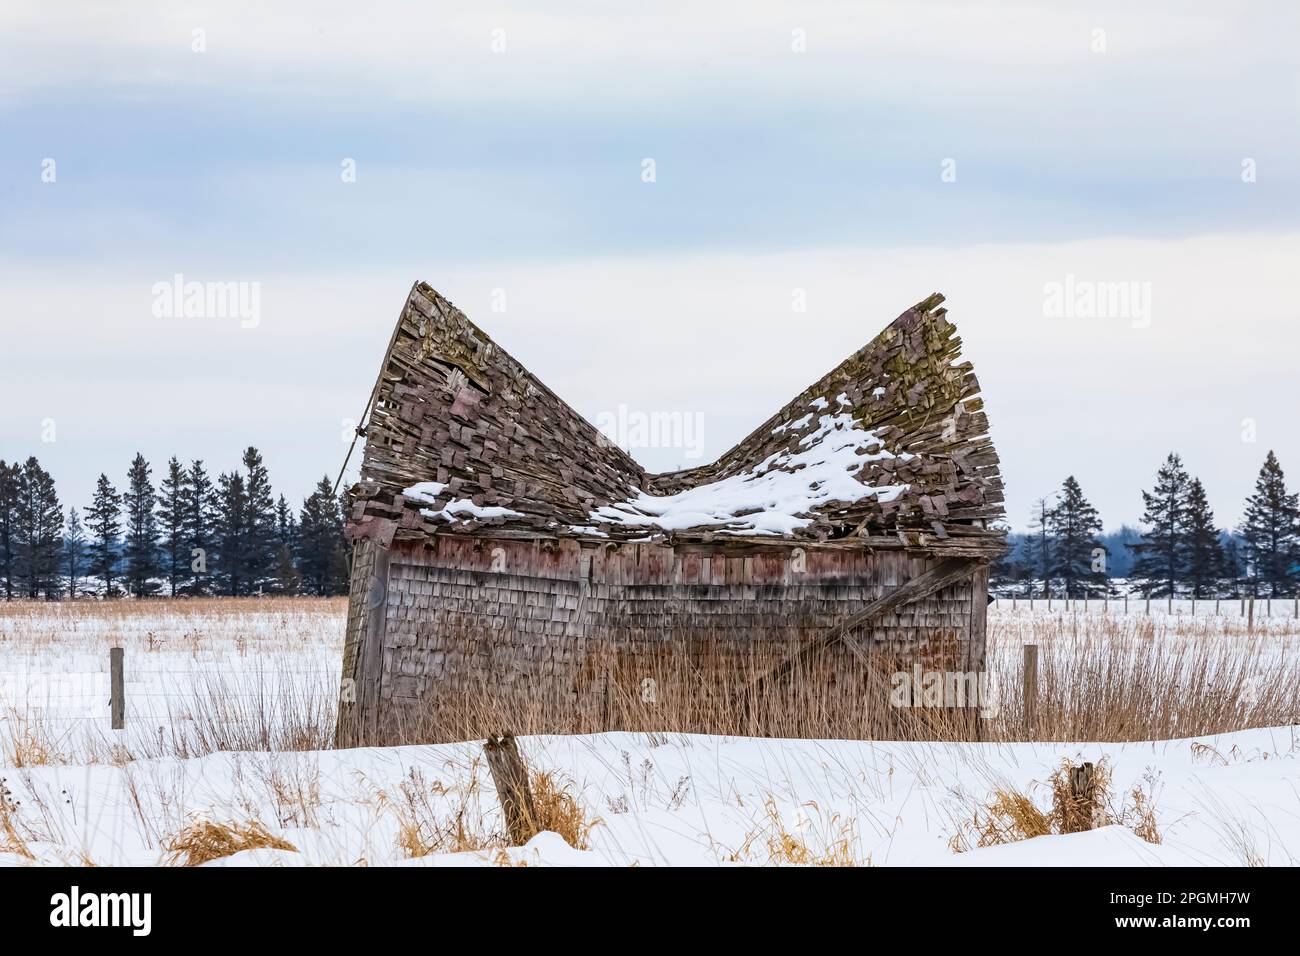 Barn with brokeback roof near Rudyard, Upper Peninsula, Michigan, USA [No property release; editorial licensing only] Stock Photo